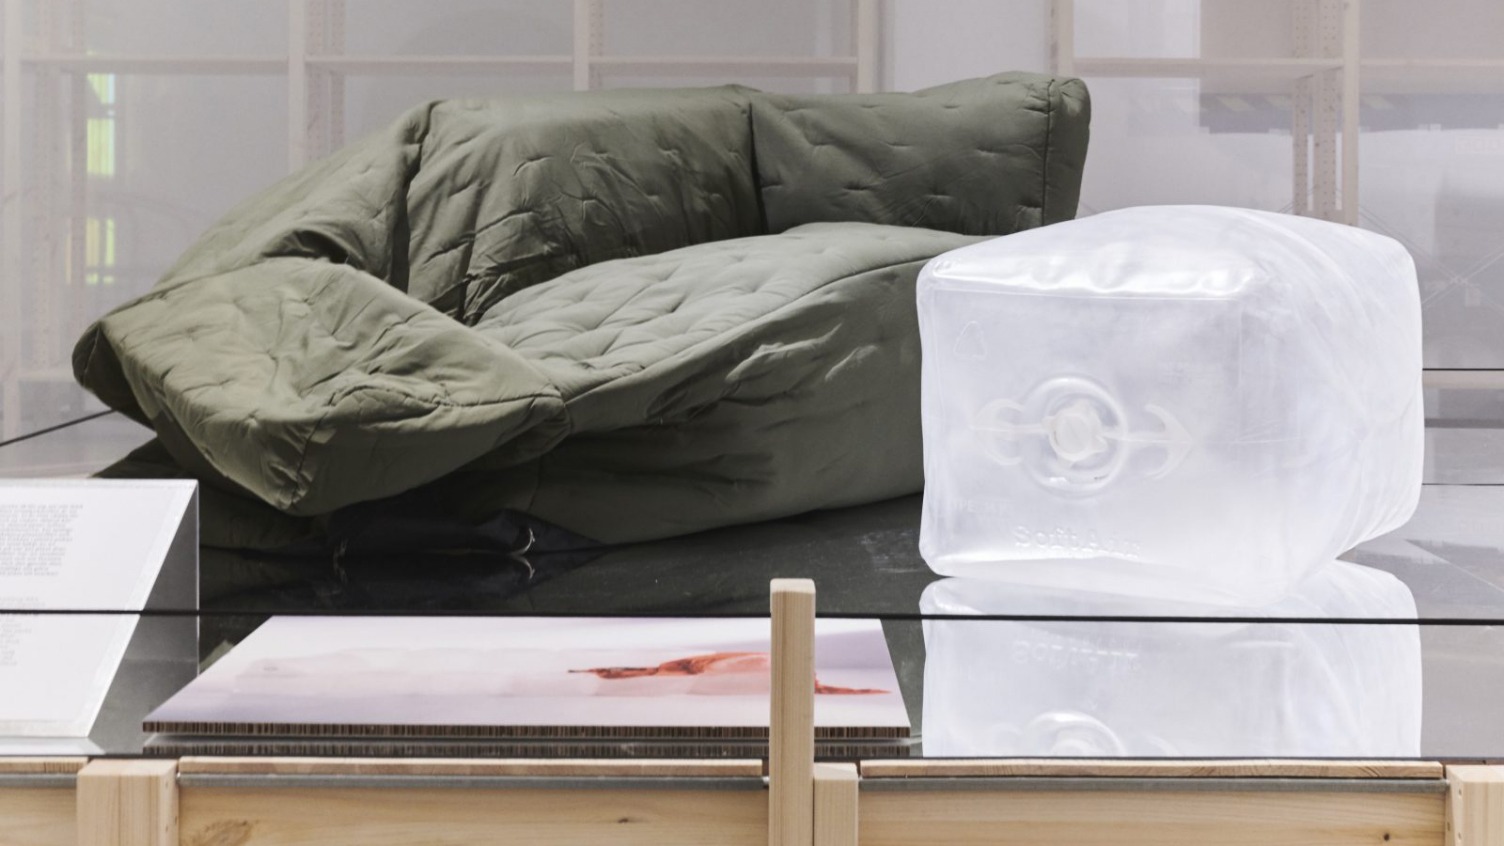 A green, semi-inflated sofa from the IKEA a.i.r collection and one unit of the inflated interior resembling a giant ice cube.